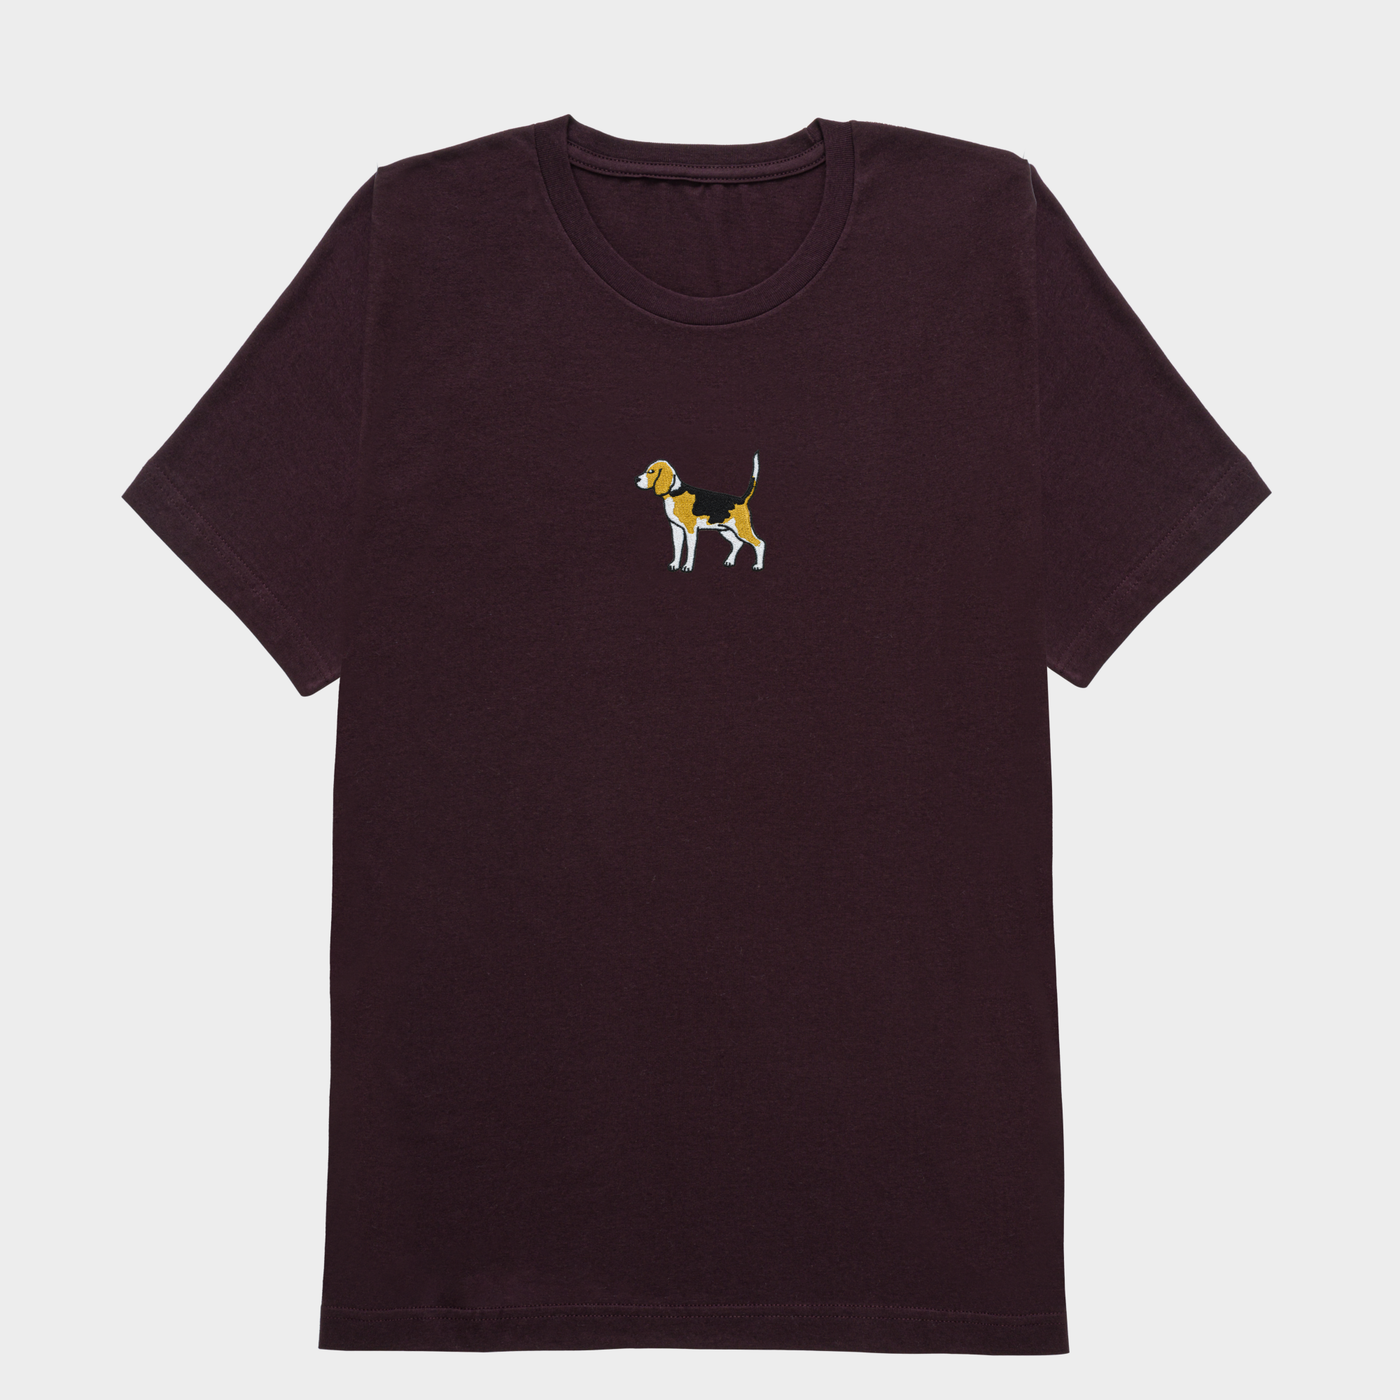 Bobby's Planet Men's Embroidered Beagle T-Shirt from Paws Dog Cat Animals Collection in Oxblood Color#color_oxblood